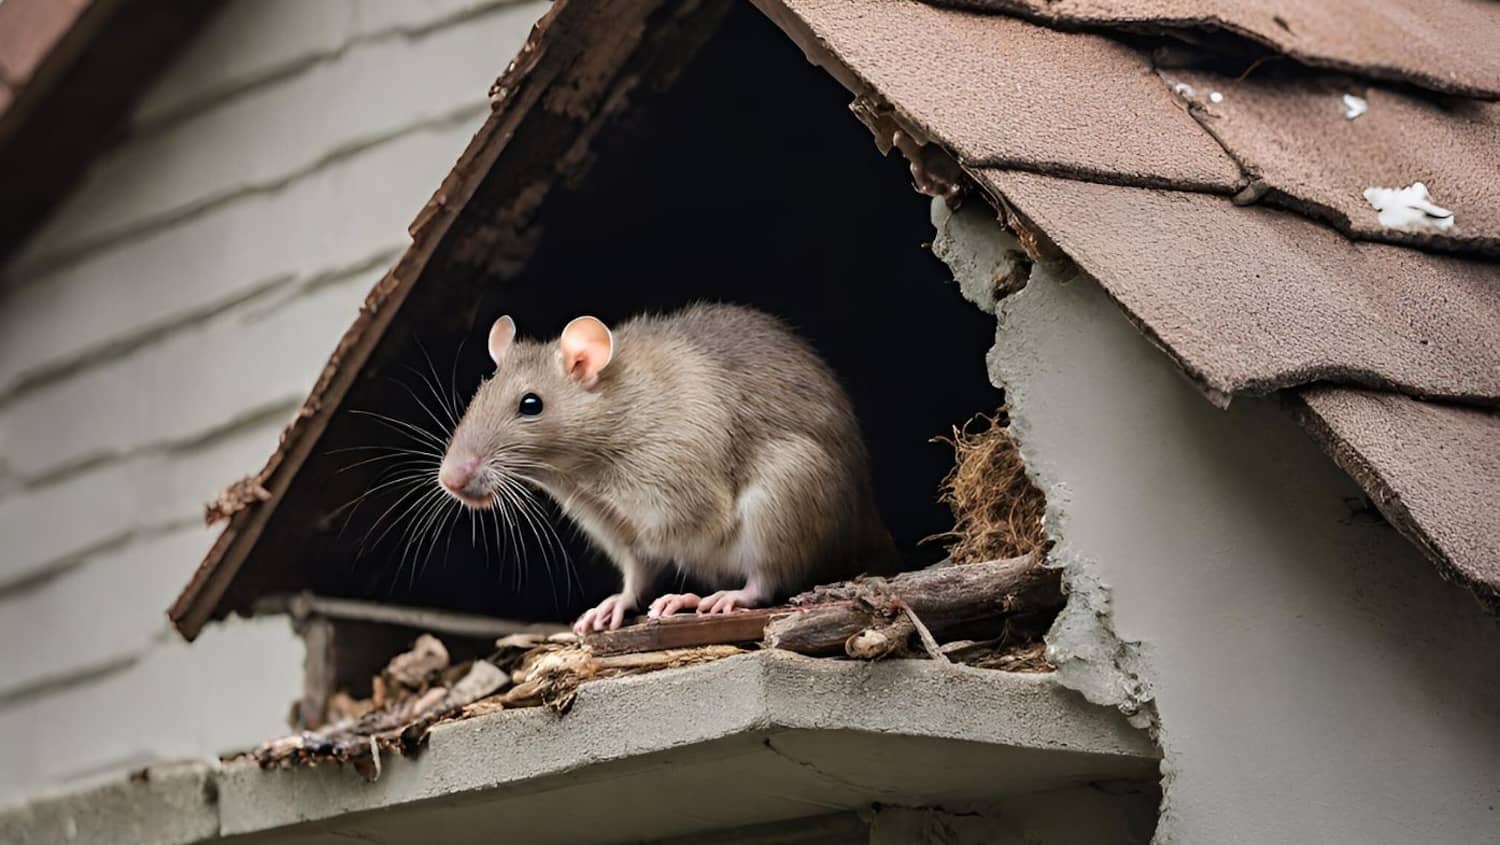 Pest damage and roof issues are some things that can fail a home inspection